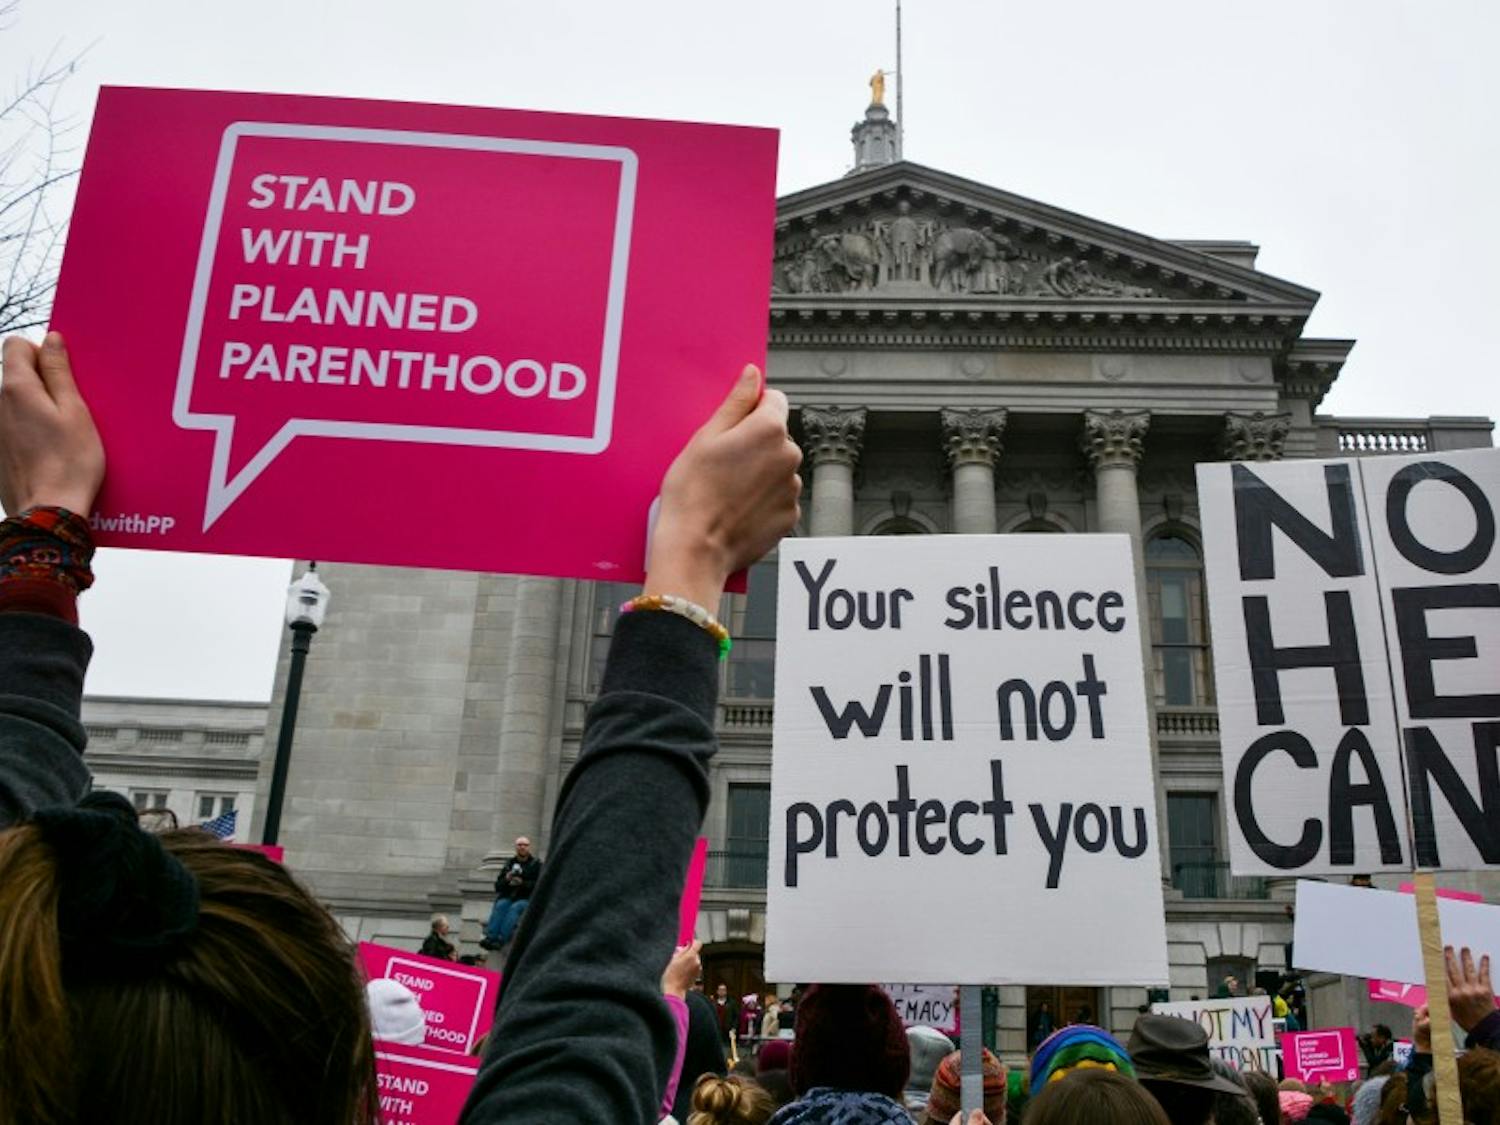 Thousands joined the Women’s March in Madison this Saturday where the protection of Planned Parenthood and women’s reproductive rights were a major theme.